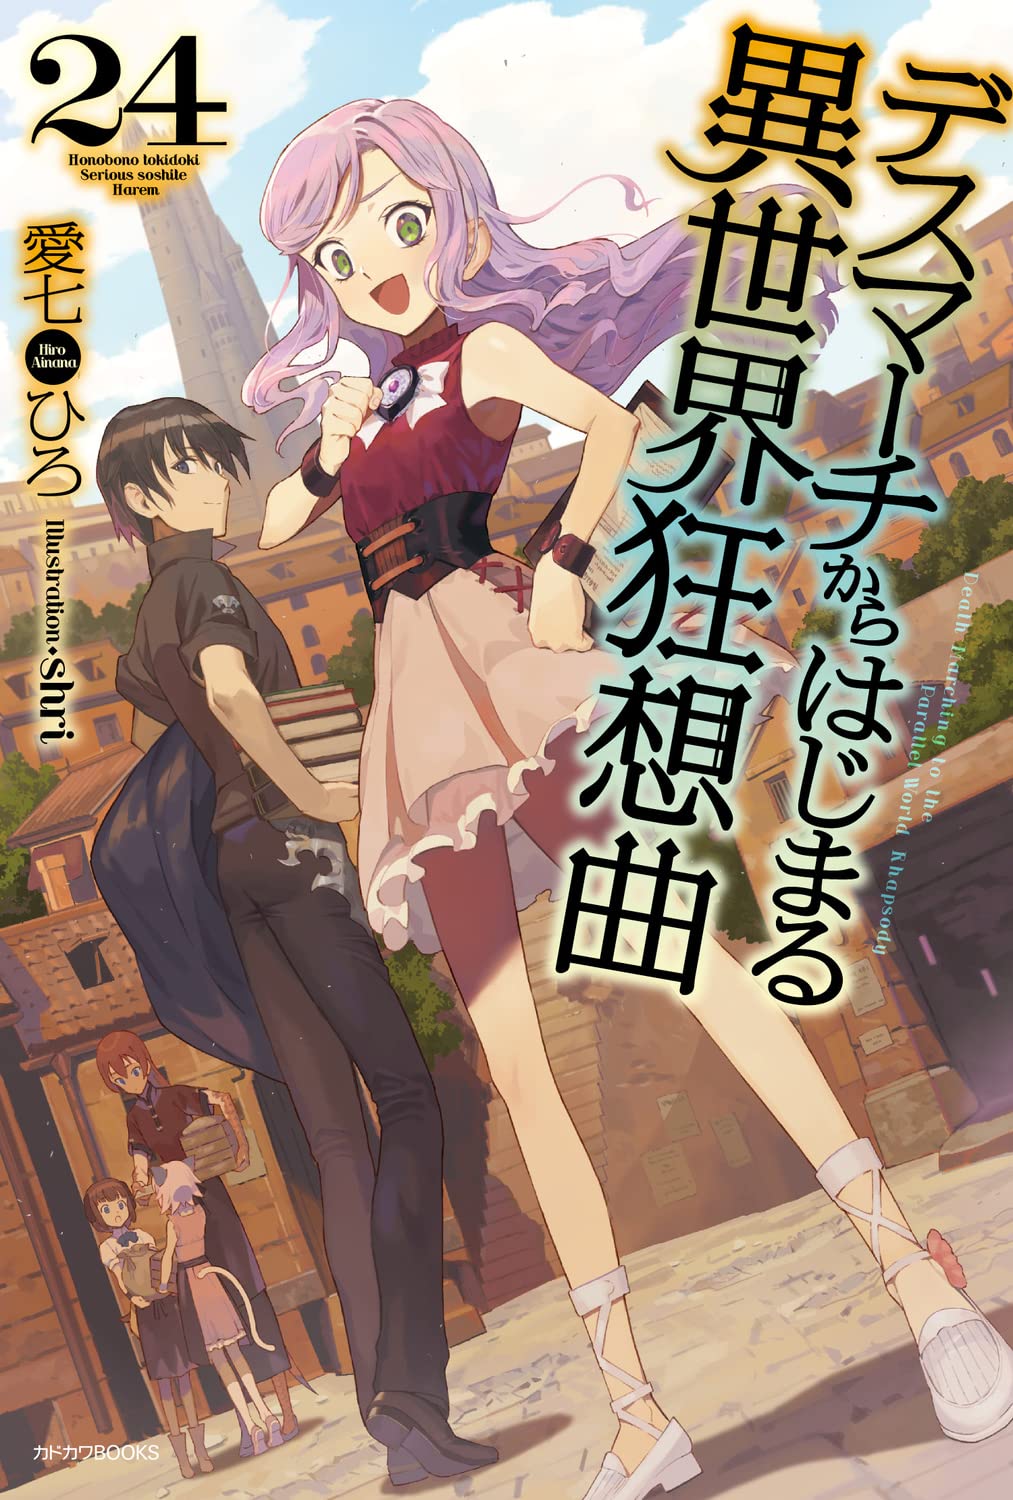 Death March to the Parallel World Rhapsody Manga